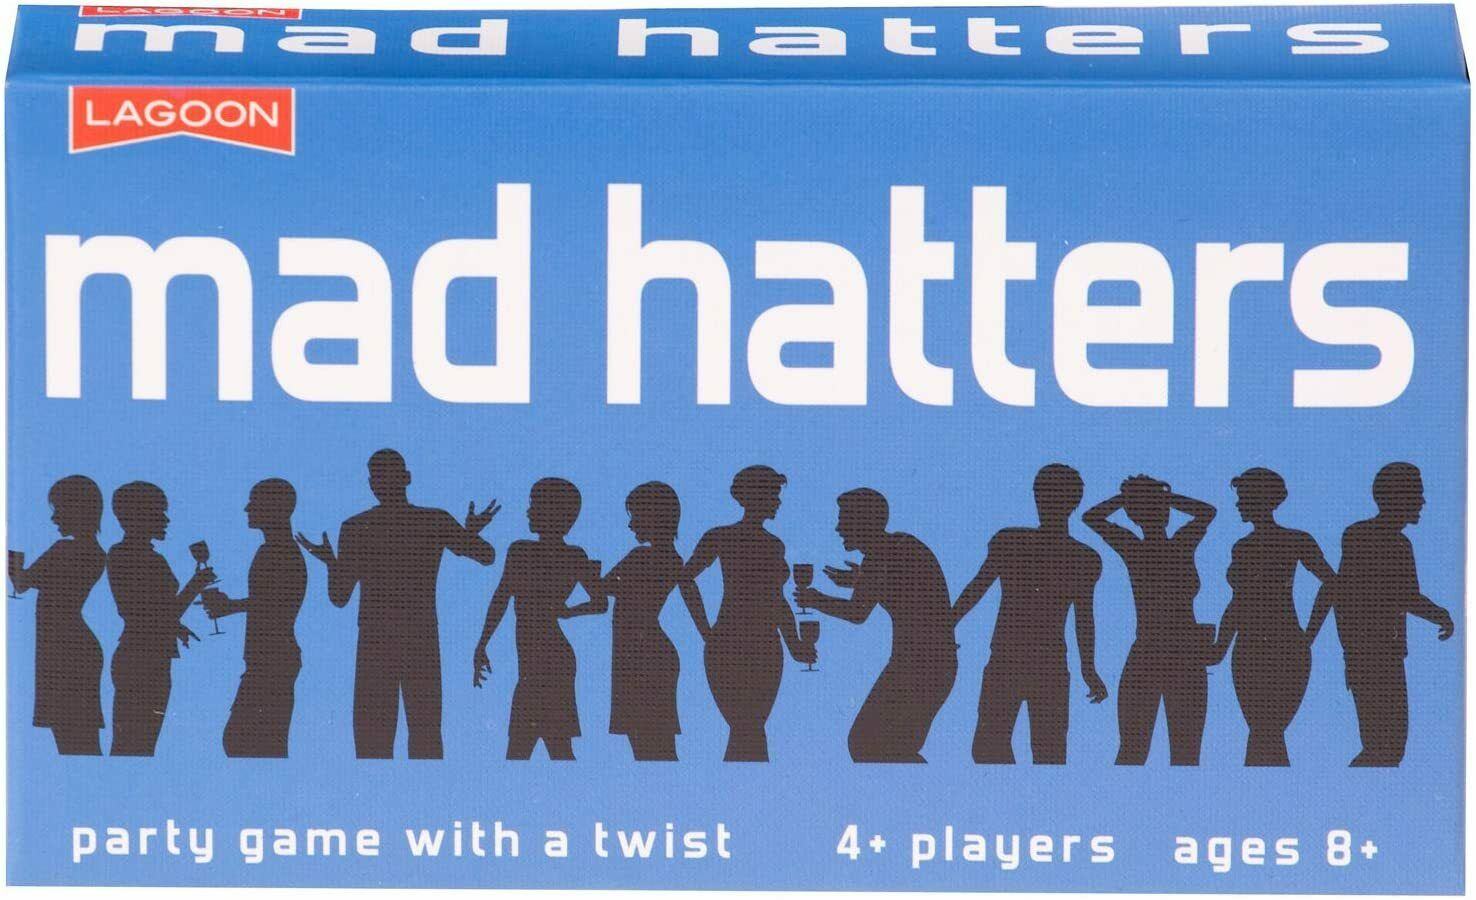 Lagoon Games - Mad Hatters Word Description Wacky Party Game